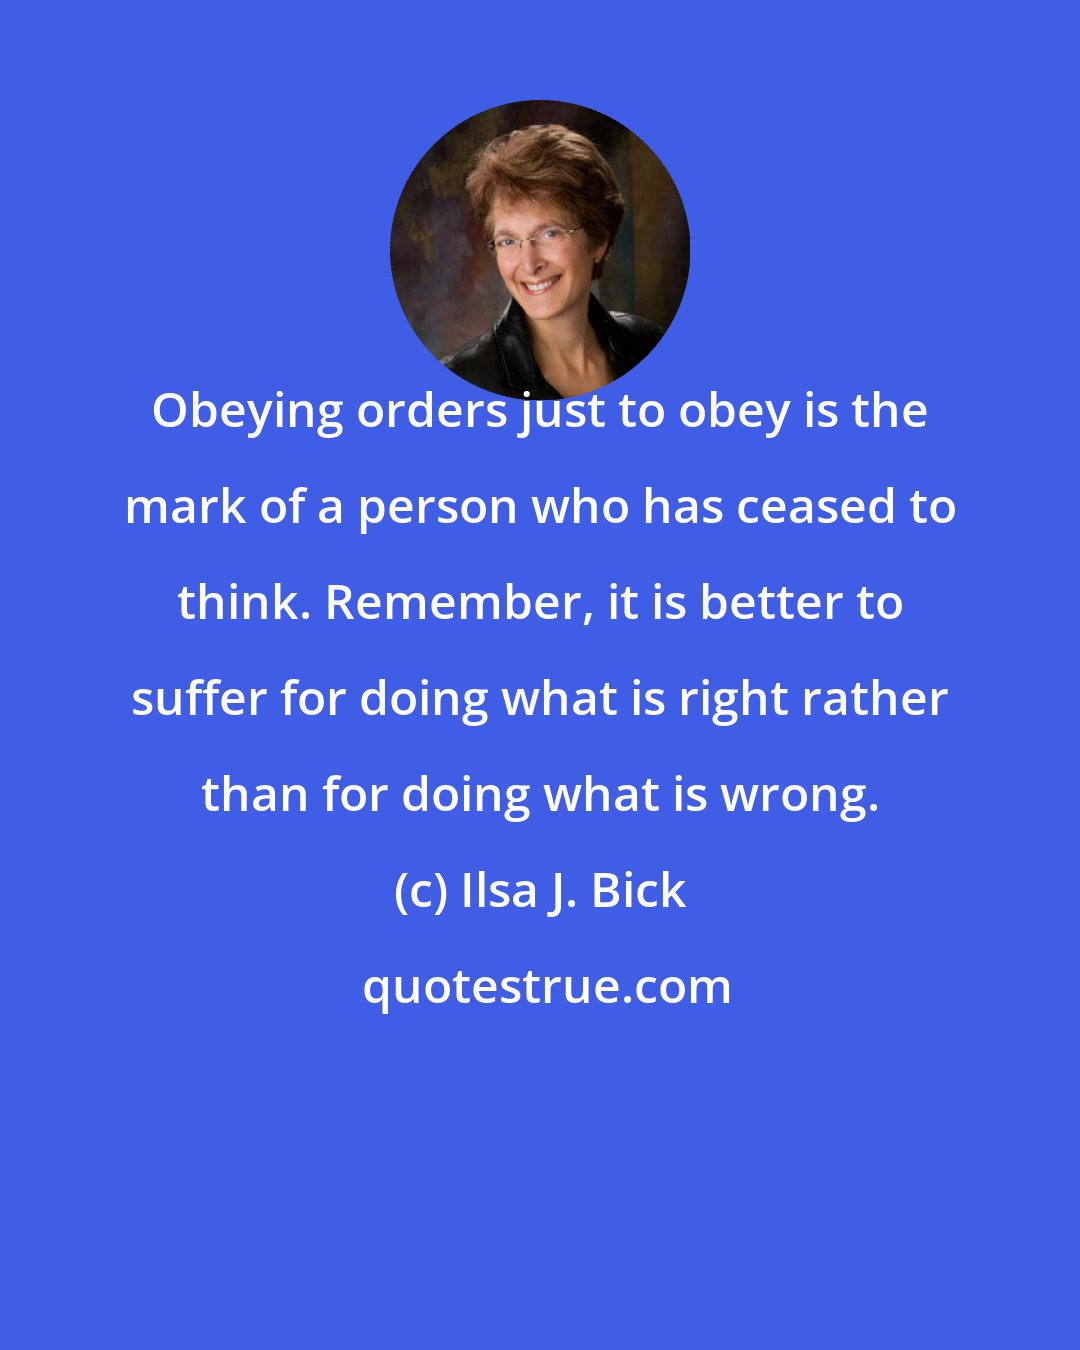 Ilsa J. Bick: Obeying orders just to obey is the mark of a person who has ceased to think. Remember, it is better to suffer for doing what is right rather than for doing what is wrong.